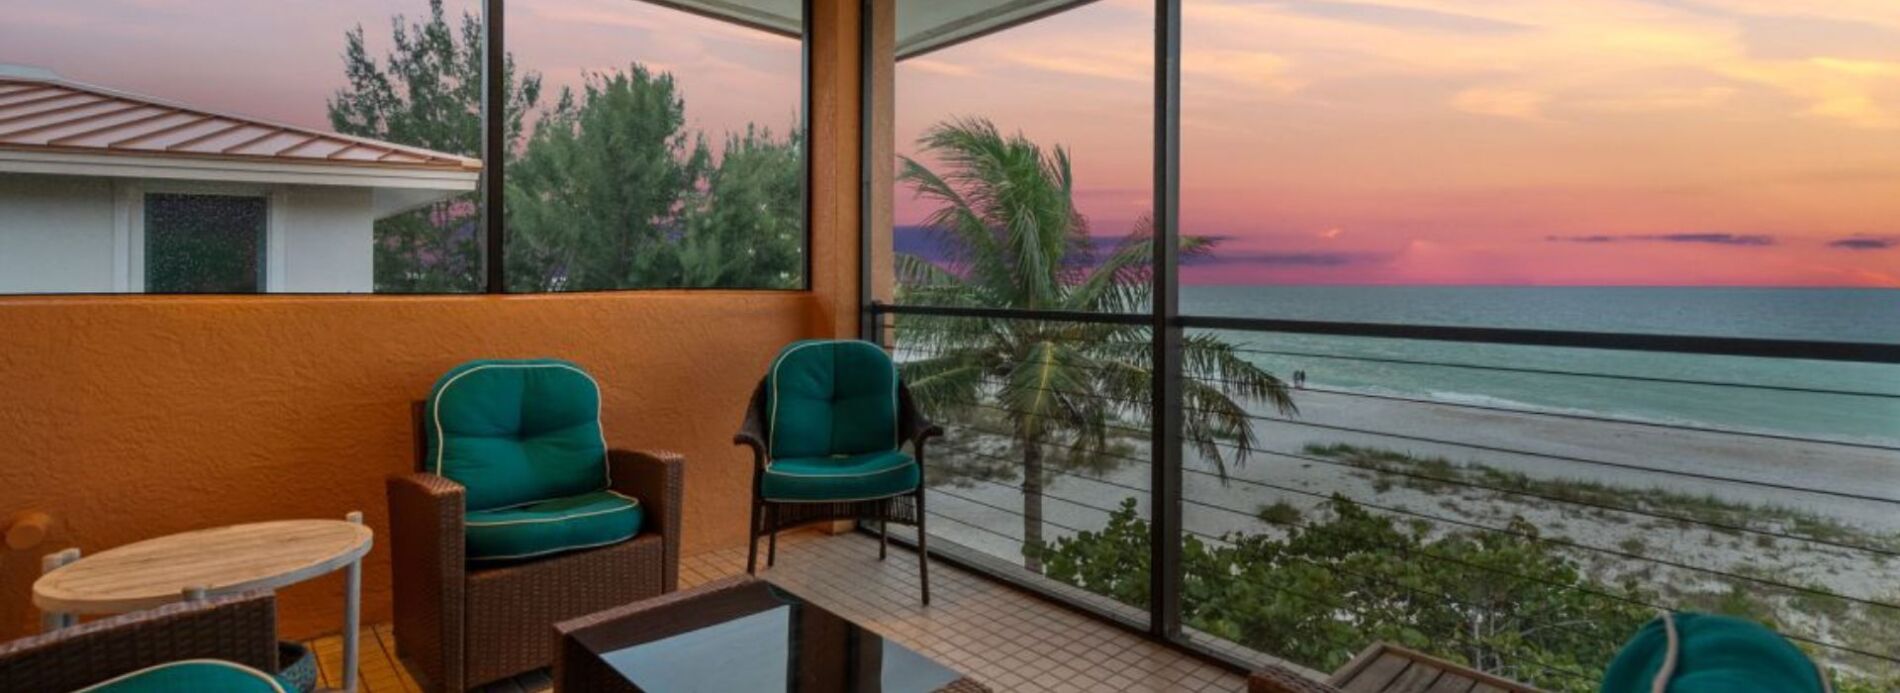 sunset penthouse porch overlooking the beach